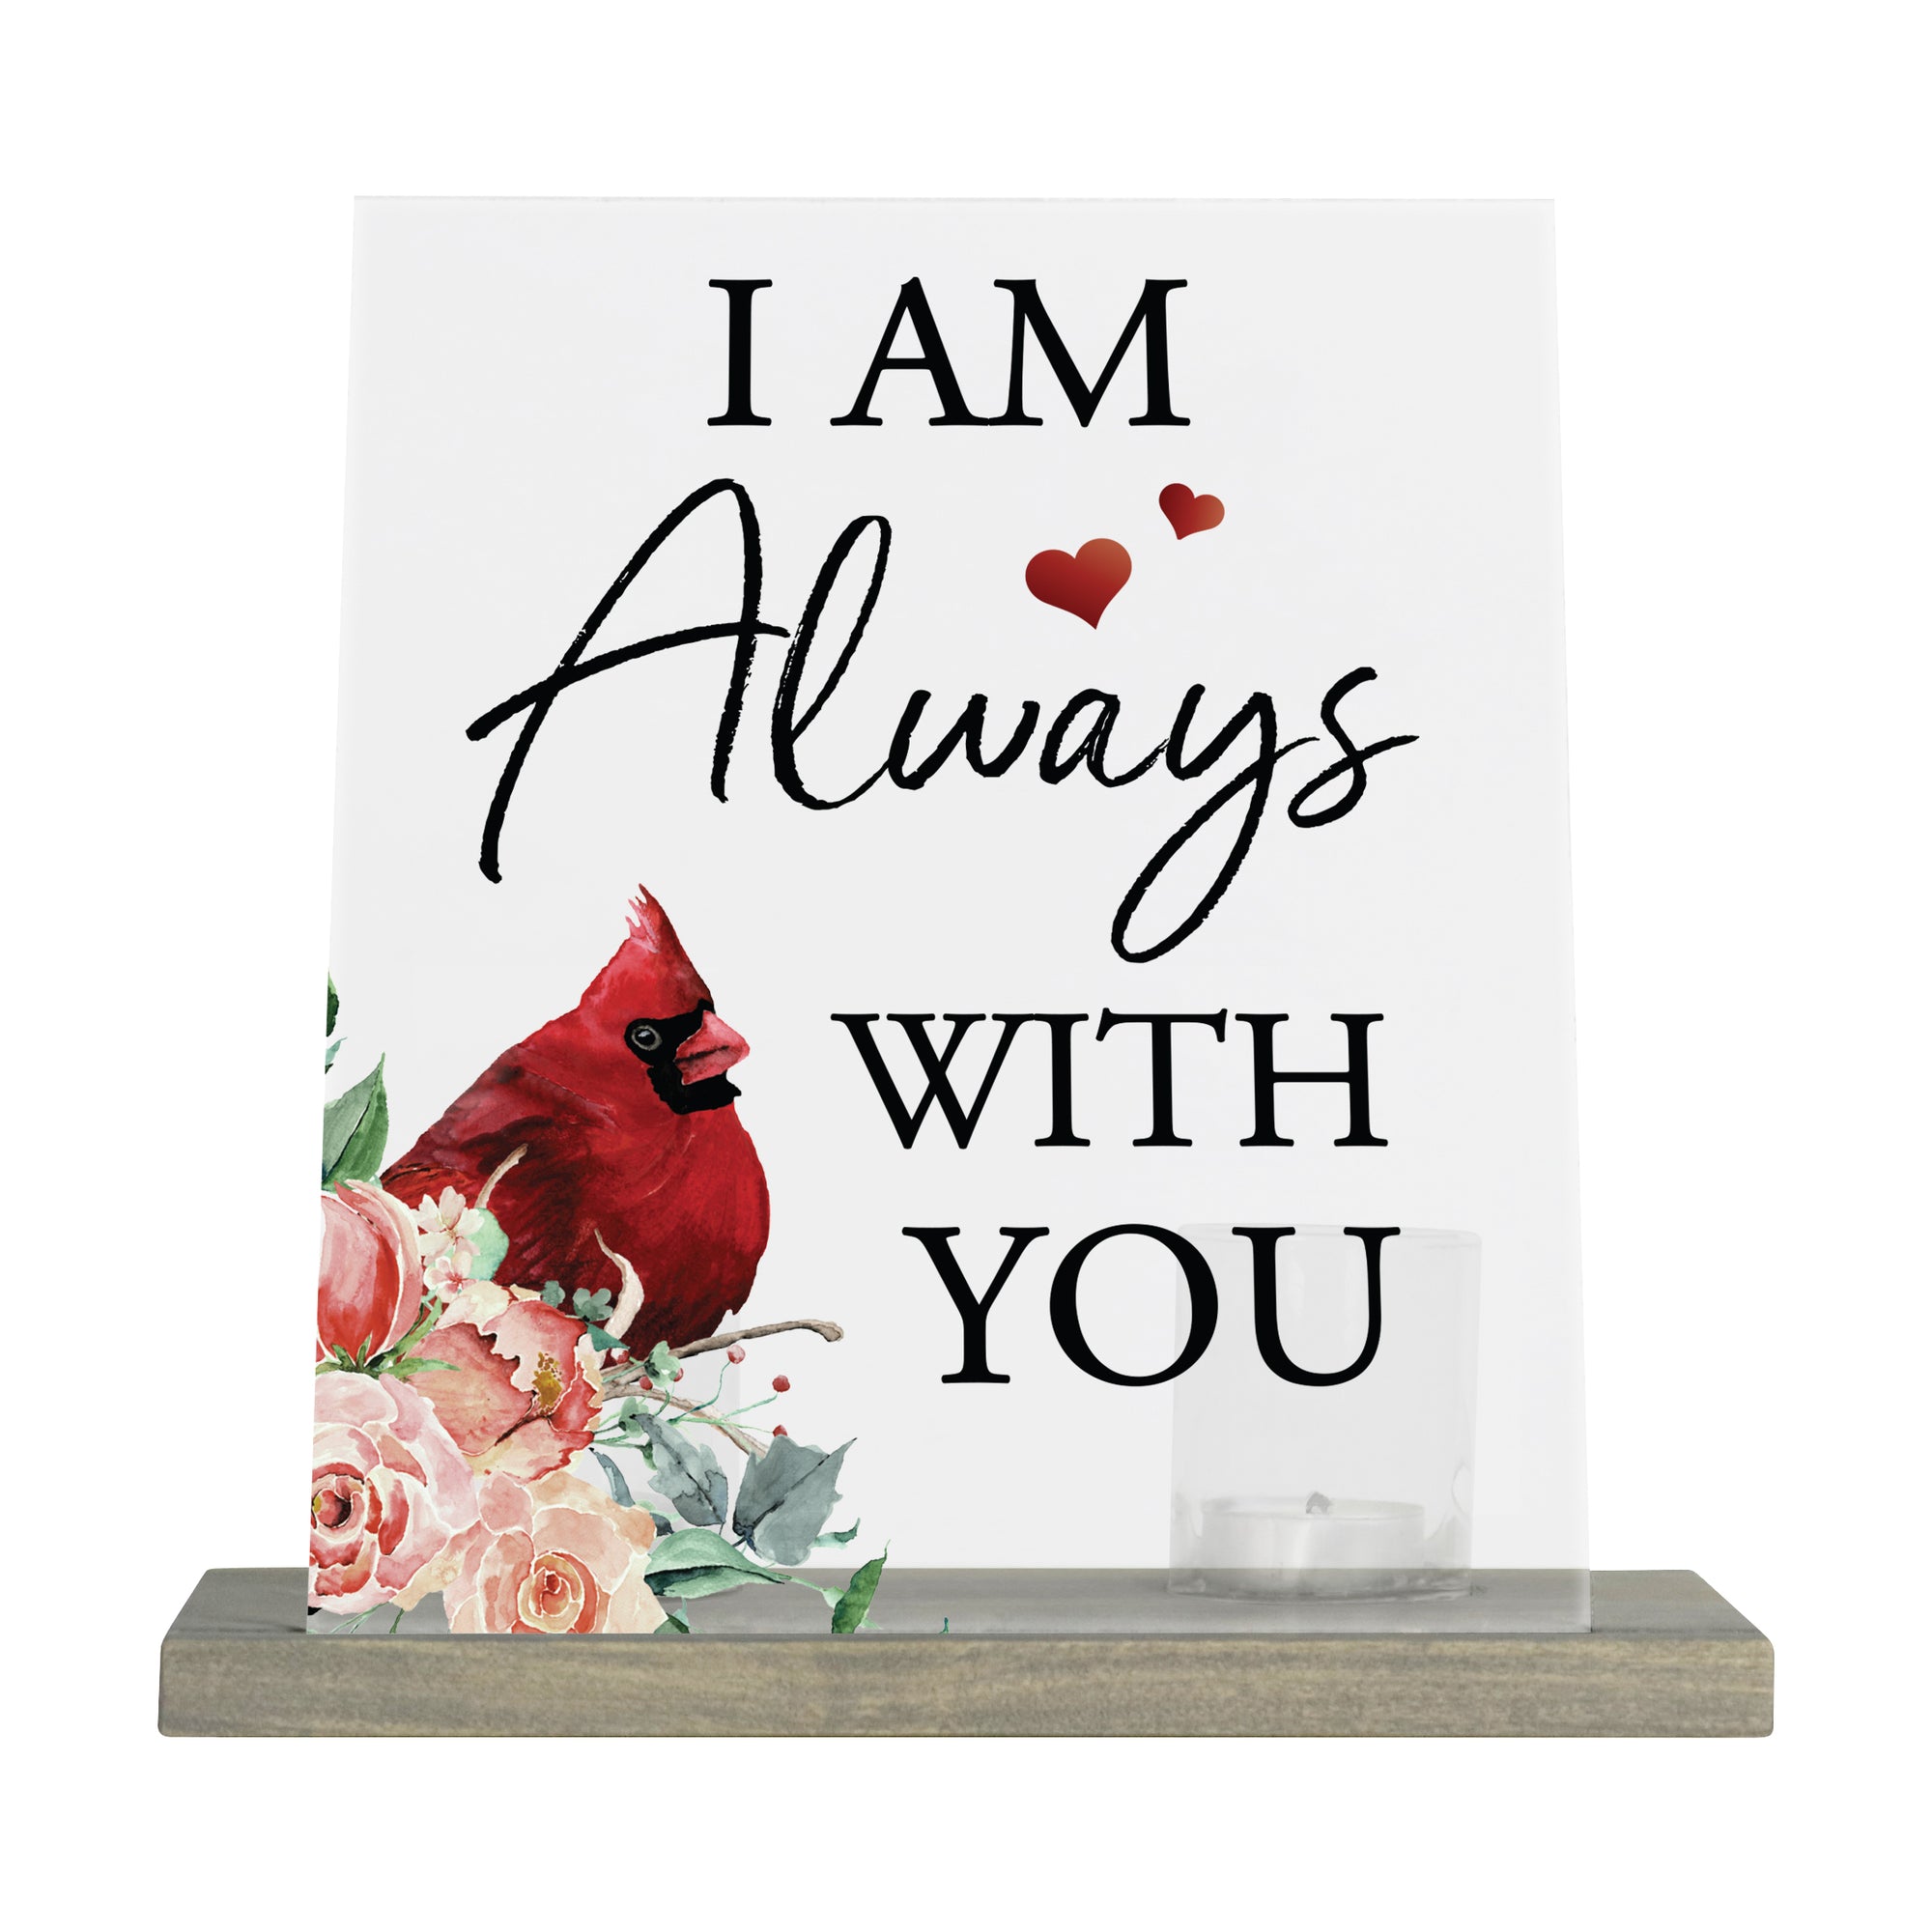 LifeSong Memorials Vintage Memorial Cardinal Acrylic Sign Candle Holder With Wood Base And Glass Votives For Home Decor | I am Always With You. Acrylic candle holders, Vintage acrylic candle holders, glass candle holders for Living Room, Bedroom, Kitchen, Dining Room, and Entryways decor perfect memorial bereavement keepsake gift ideas for Family & Friends.